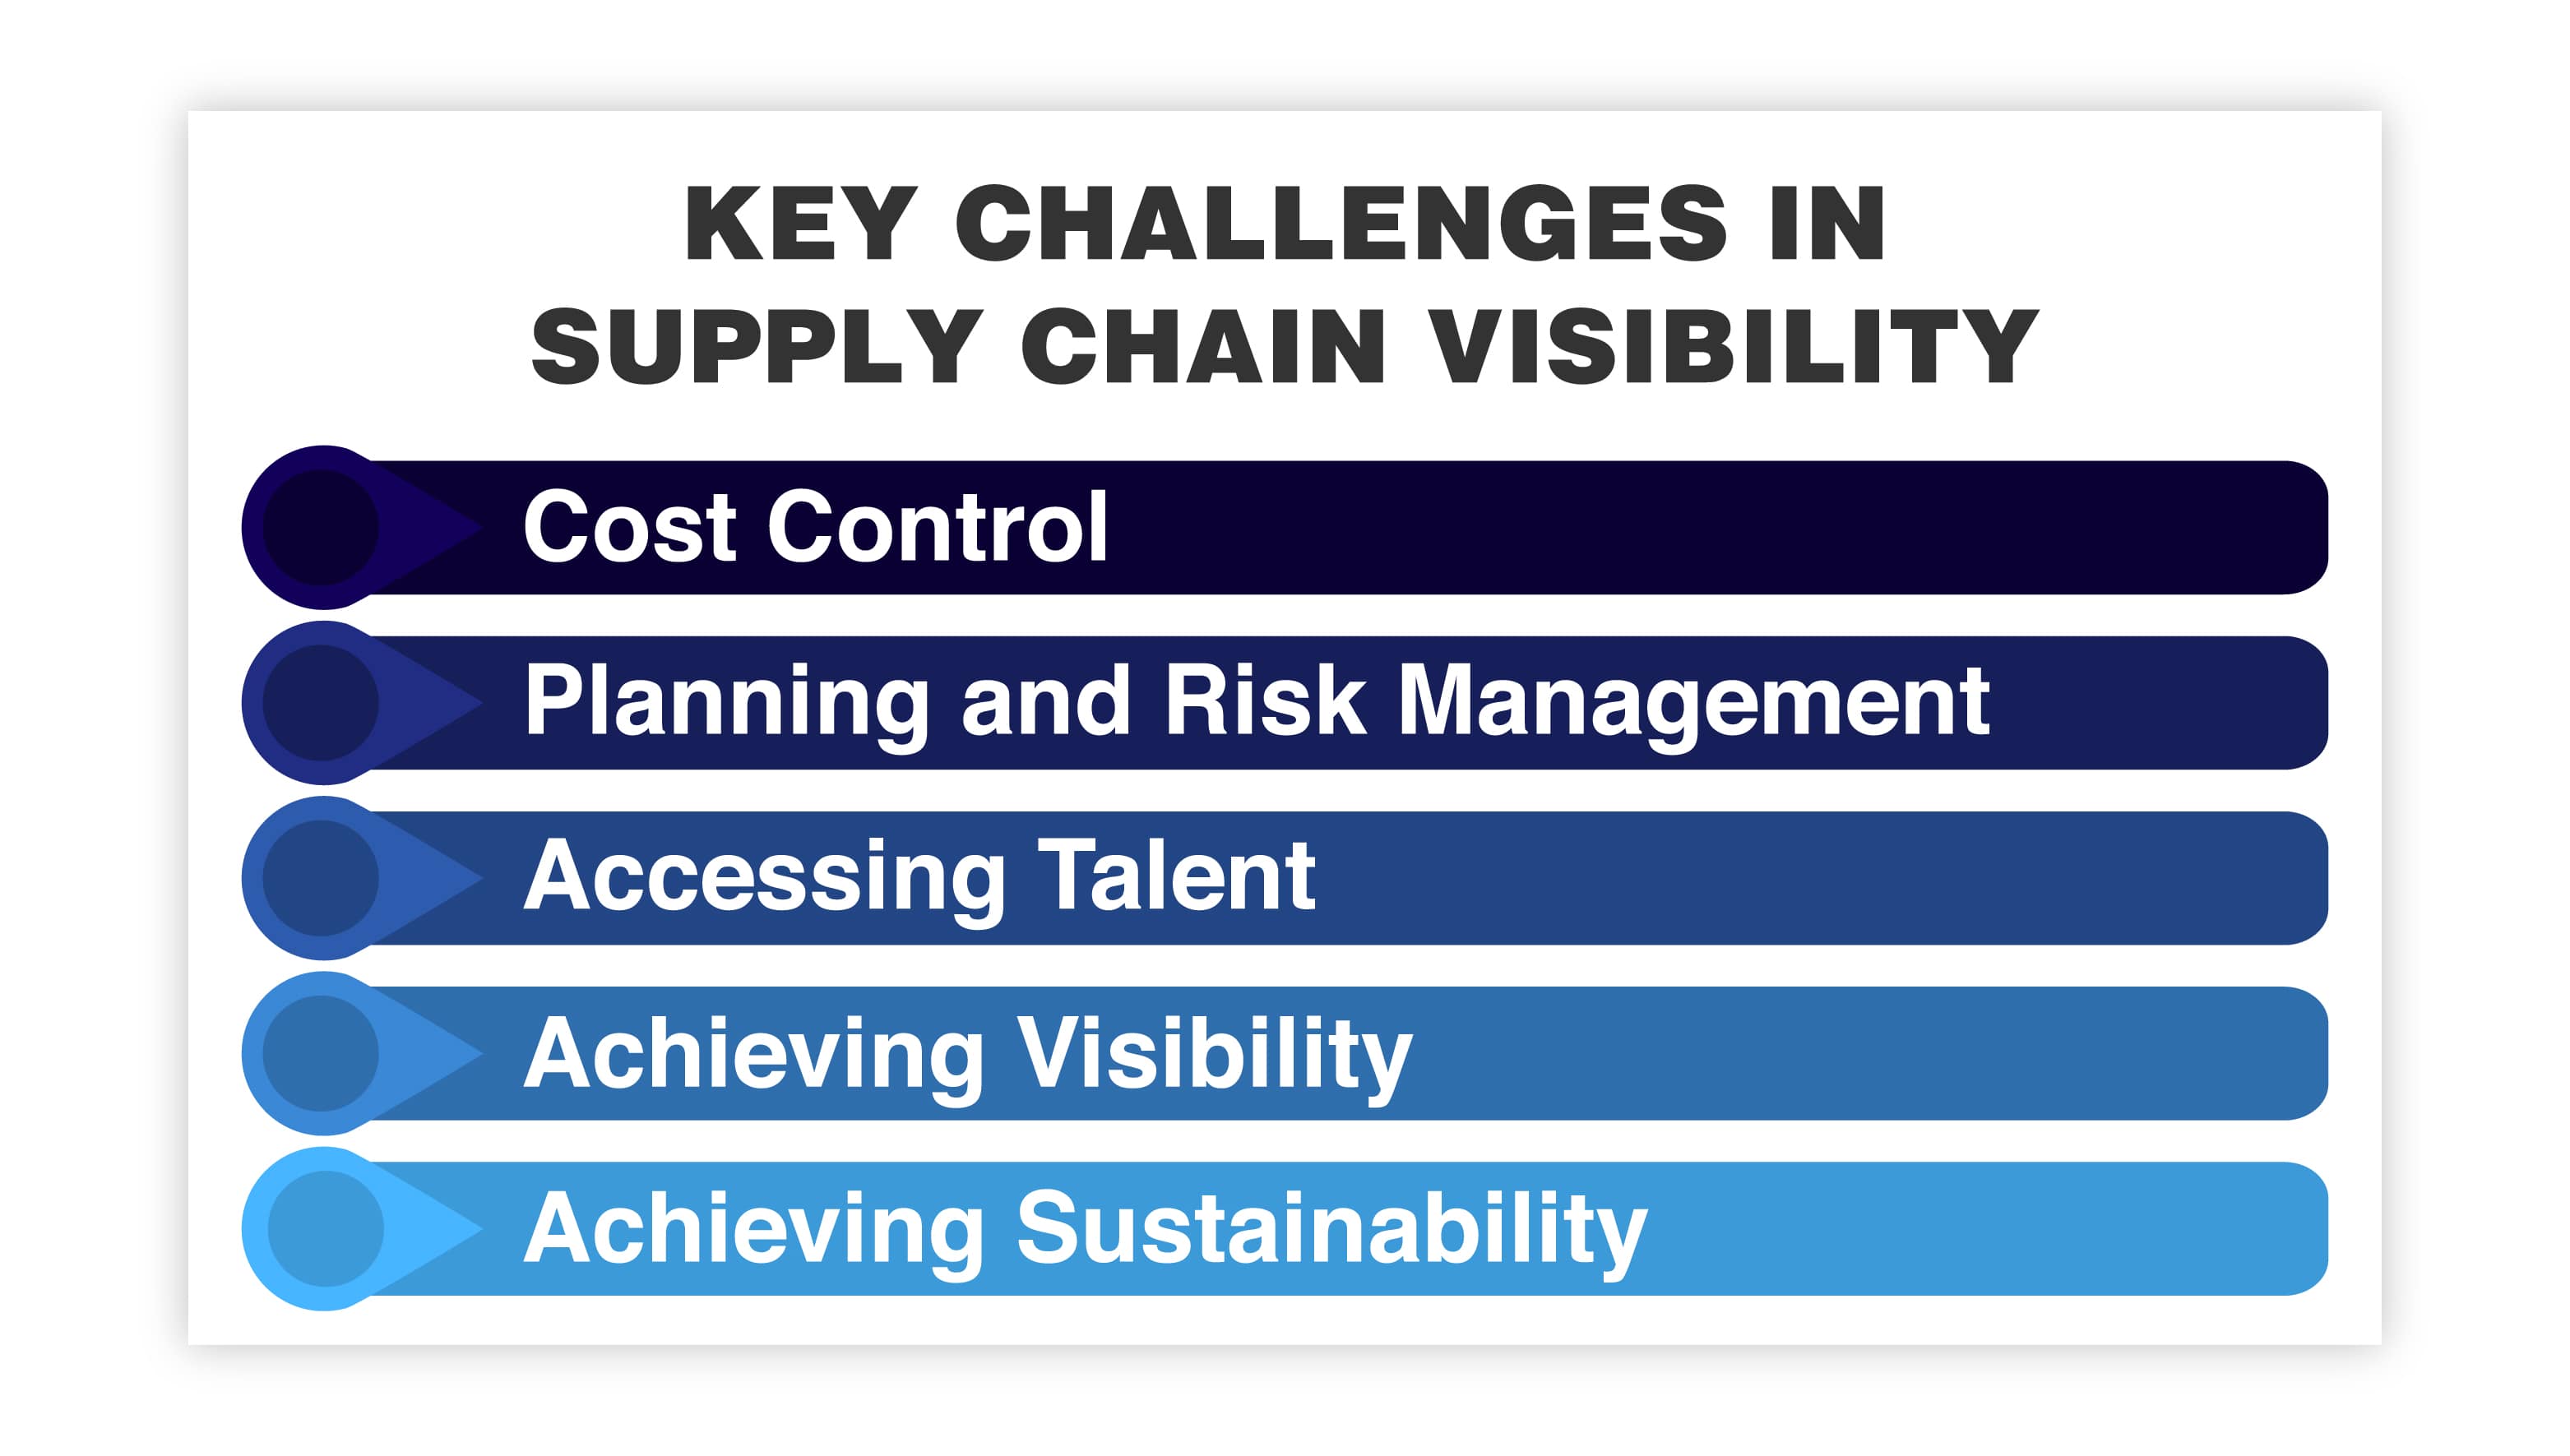 KEY CHALLENGES IN SUPPLY CHAIN VISIBILITY